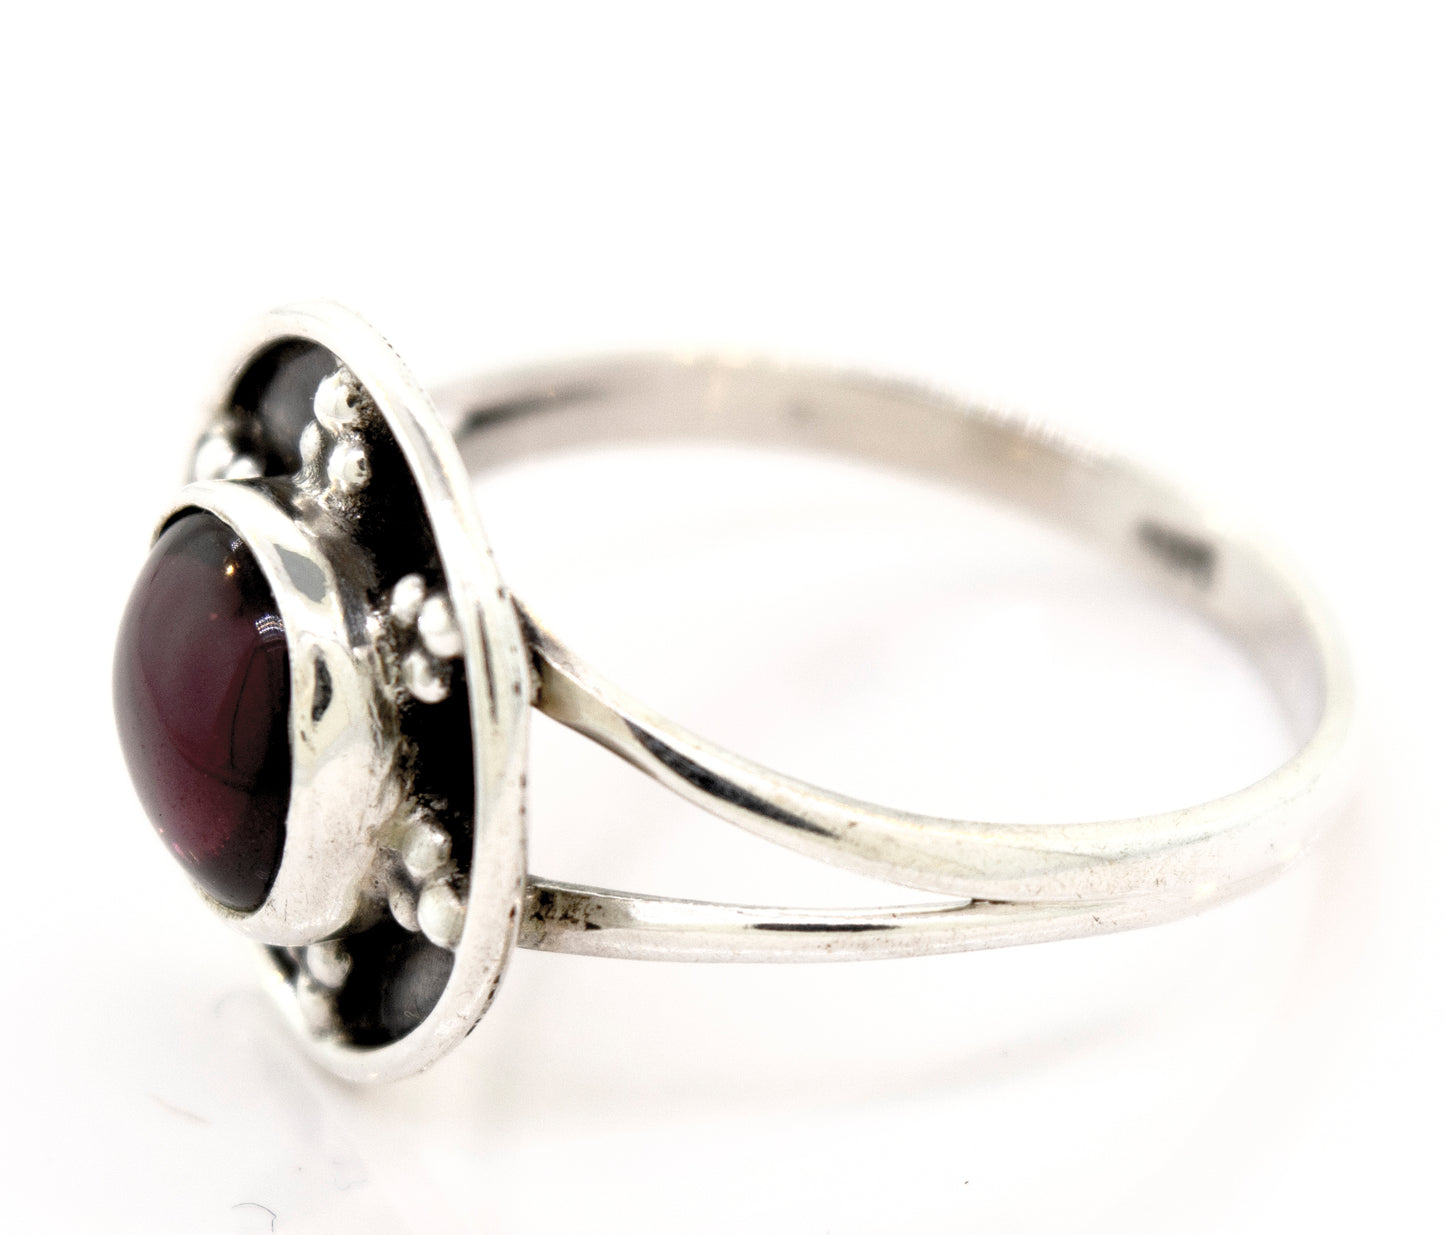 A Super Silver garnet ring with a unique oxidized silver design and a stunning garnet stone centerpiece.